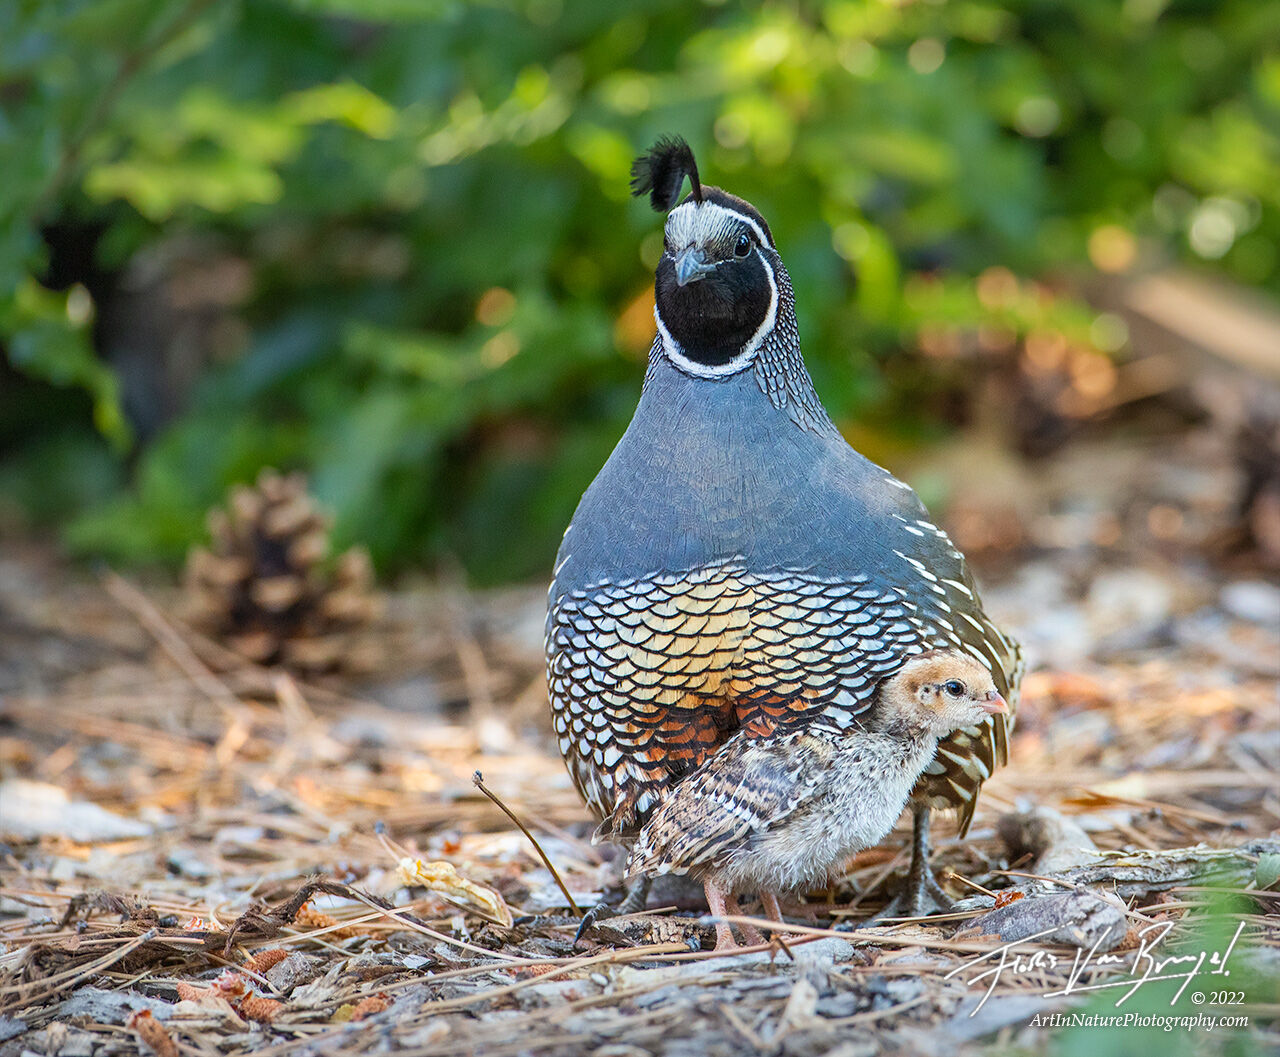 This father and baby California Quail (and many other youngsters!) spent some time foraging in our backyard in Reno, NV.